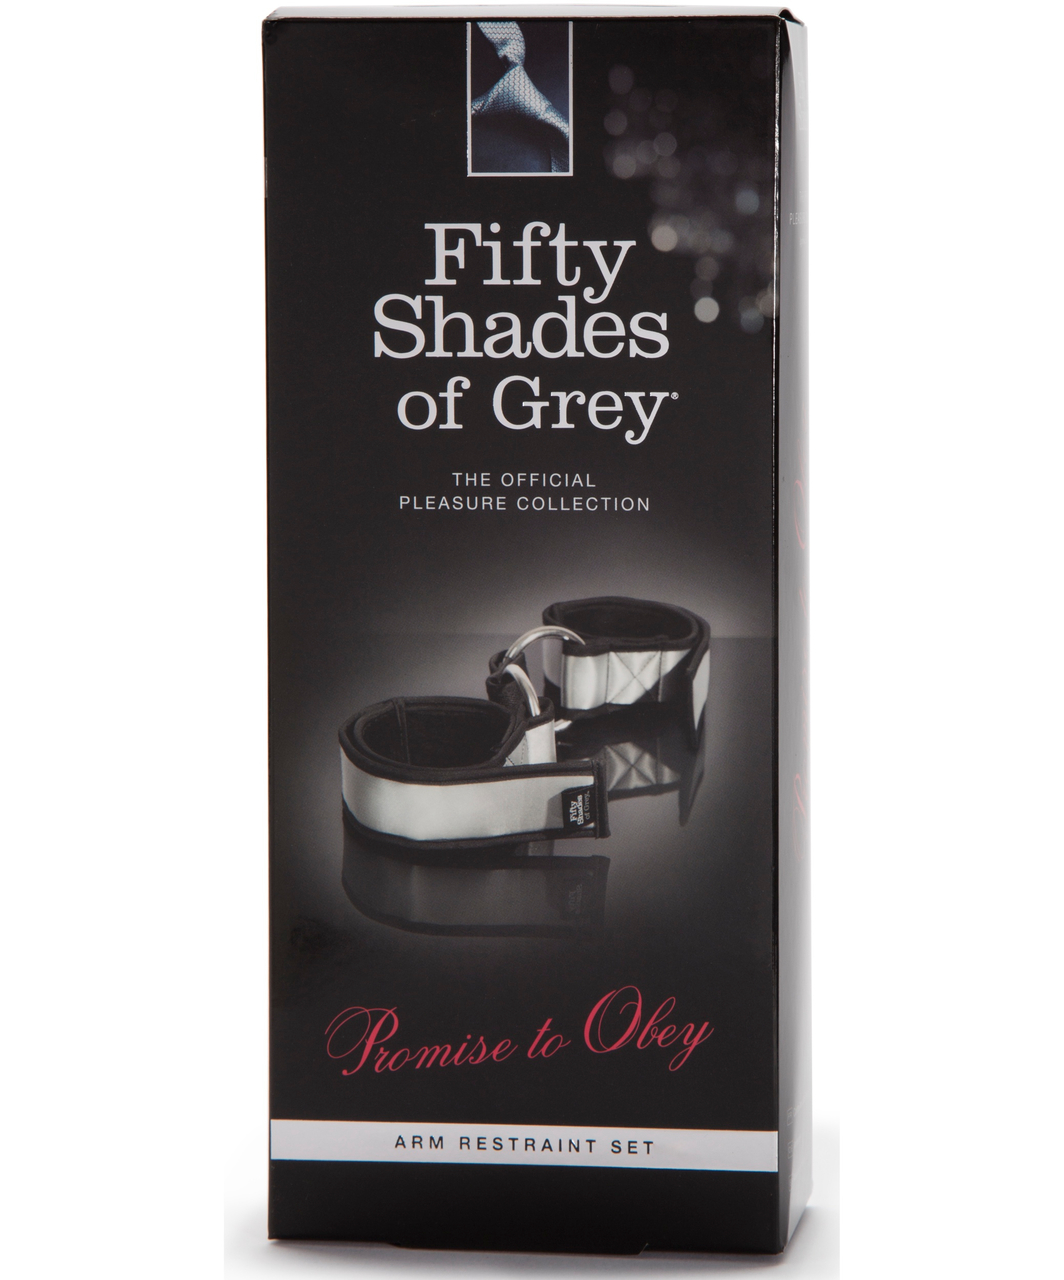 Fifty Shades of Grey Promise To Obey Arm Restraint Set